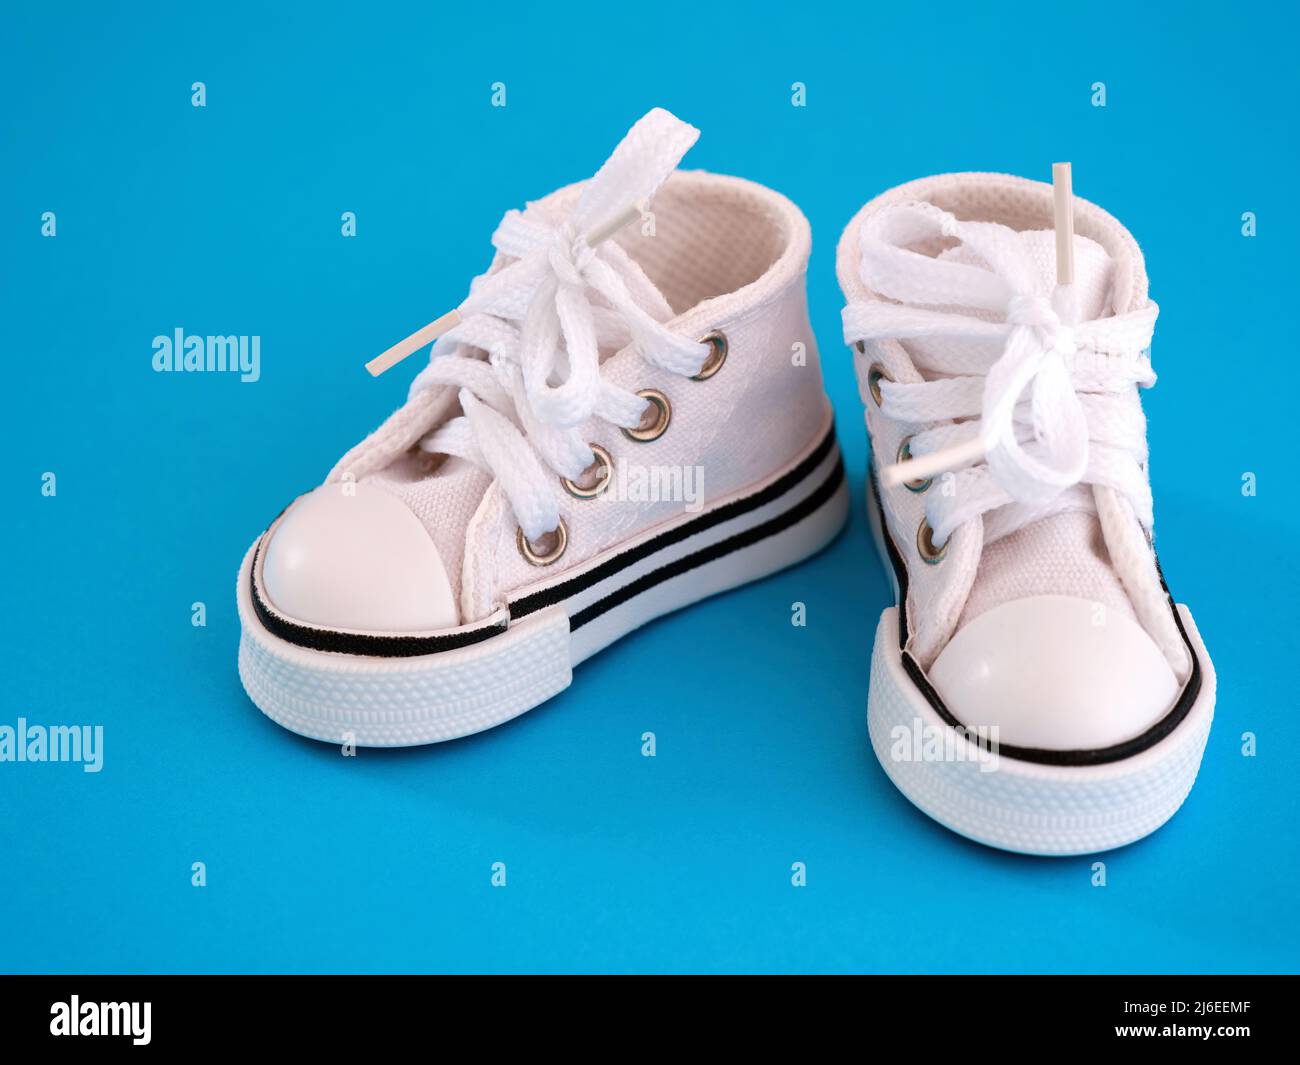 Pair of a white doll shoes on a blue background Stock Photo